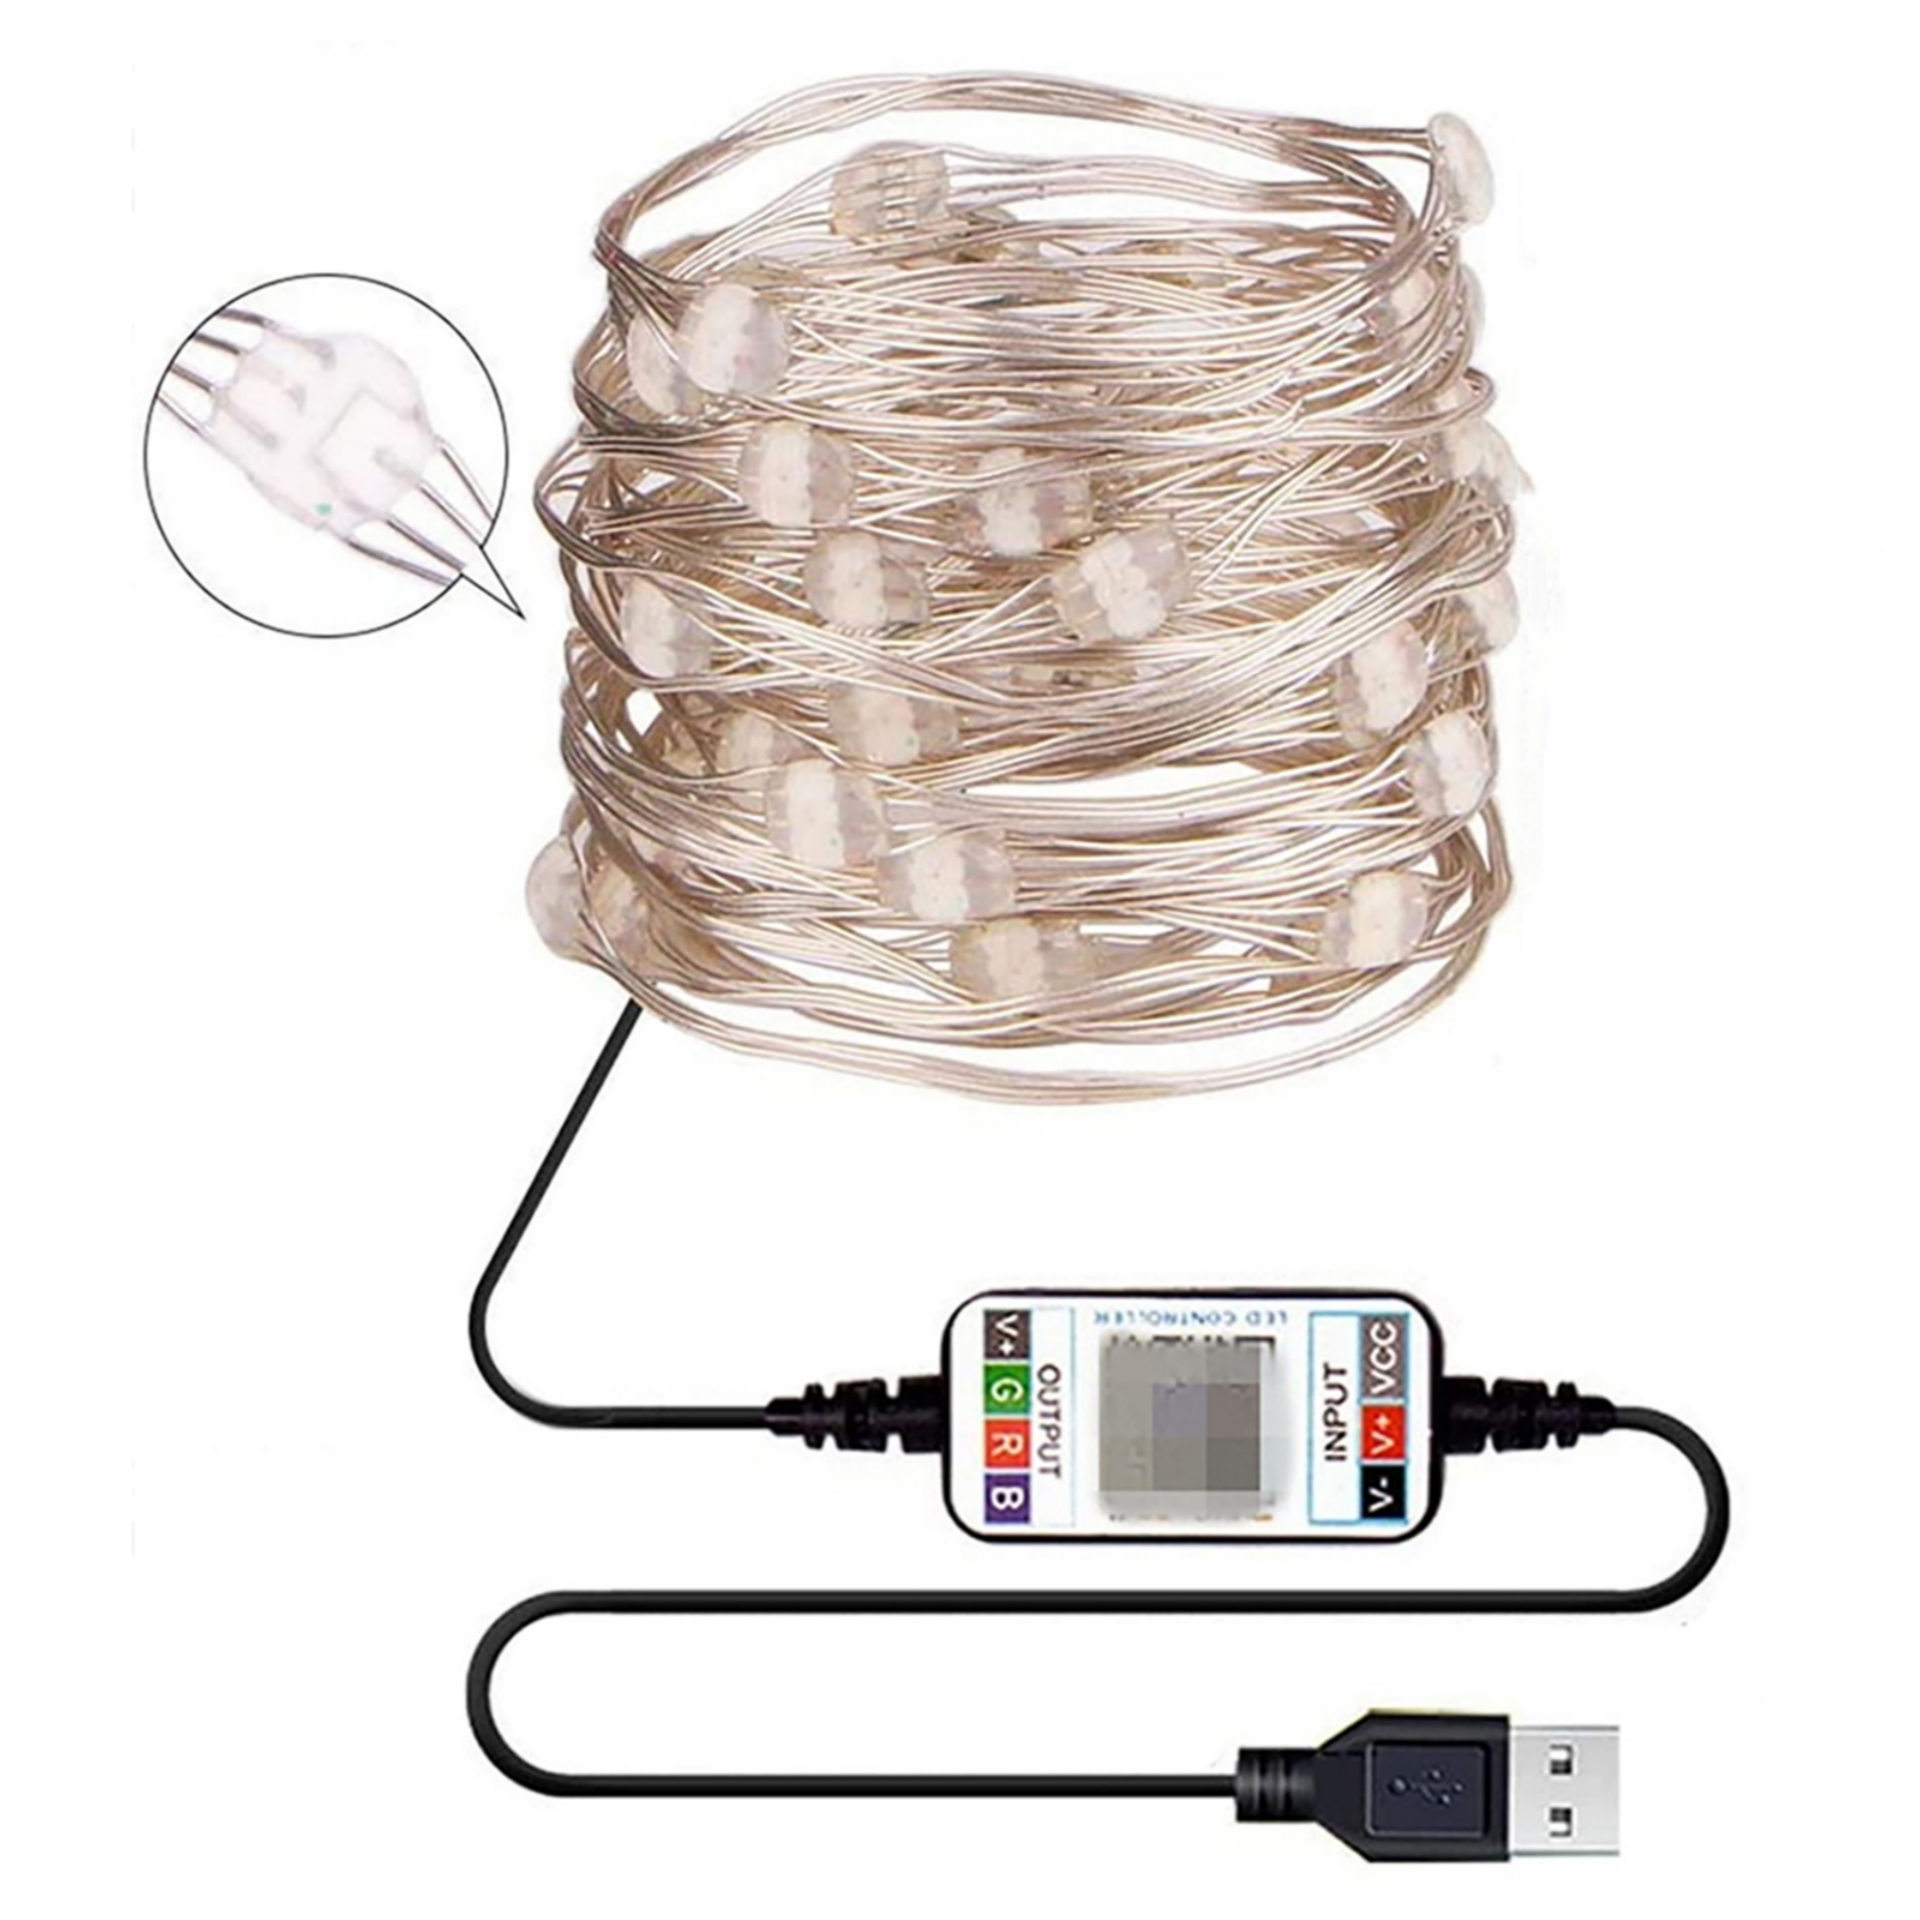 USB String Lights IP67 Waterproof Voice Controlled 7 Pattern 29 Modes 16 Million Colors Copper Wire Lights